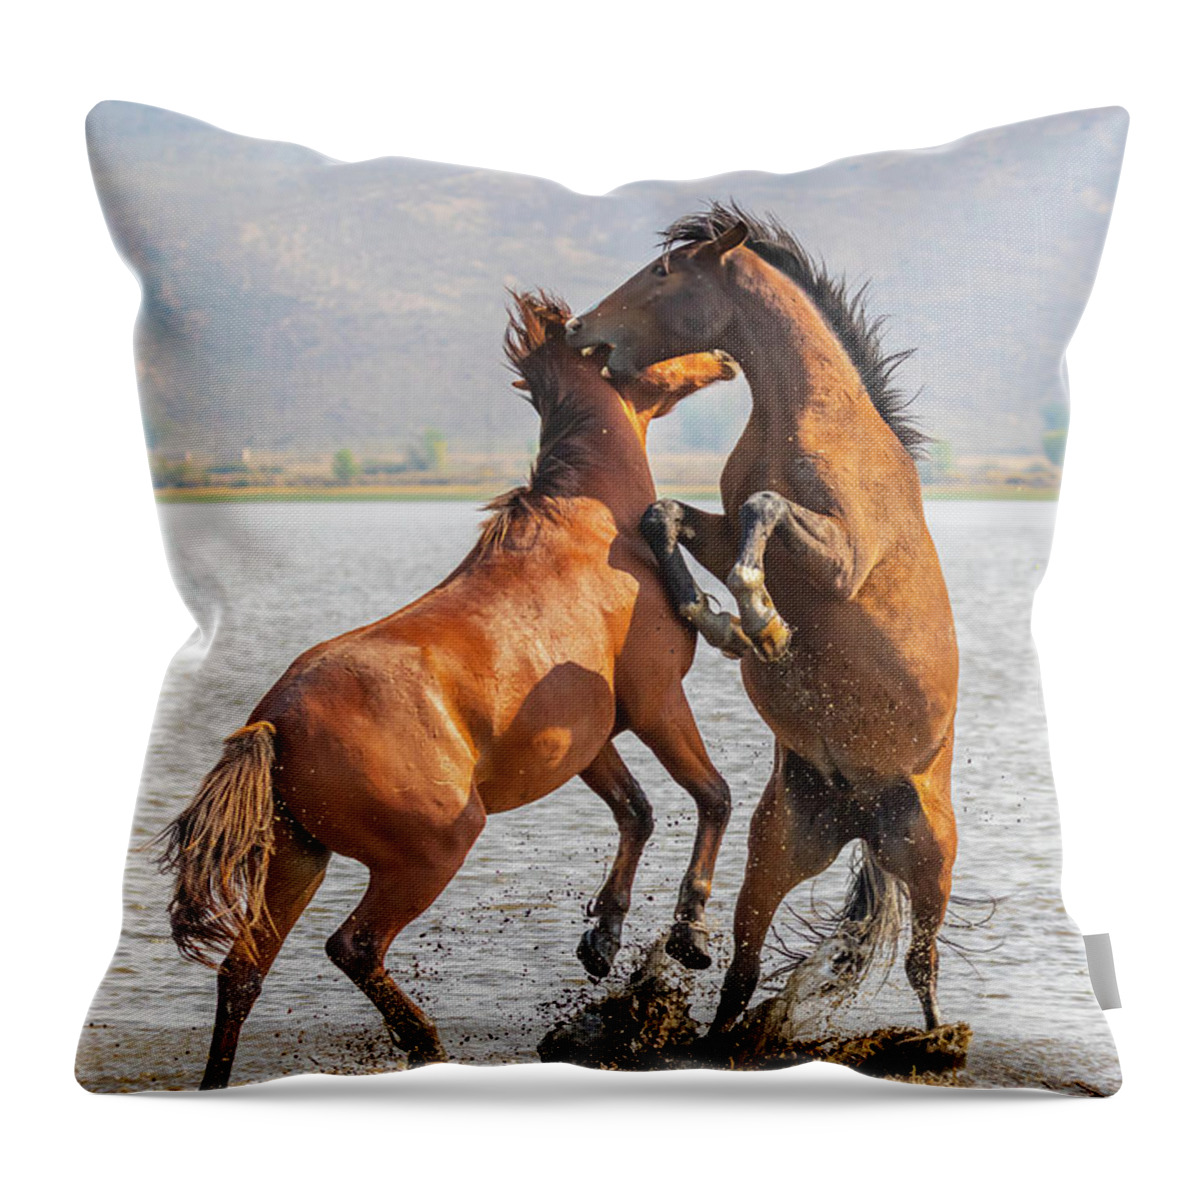 Nevada Throw Pillow featuring the photograph Shoreline Fight by Marc Crumpler